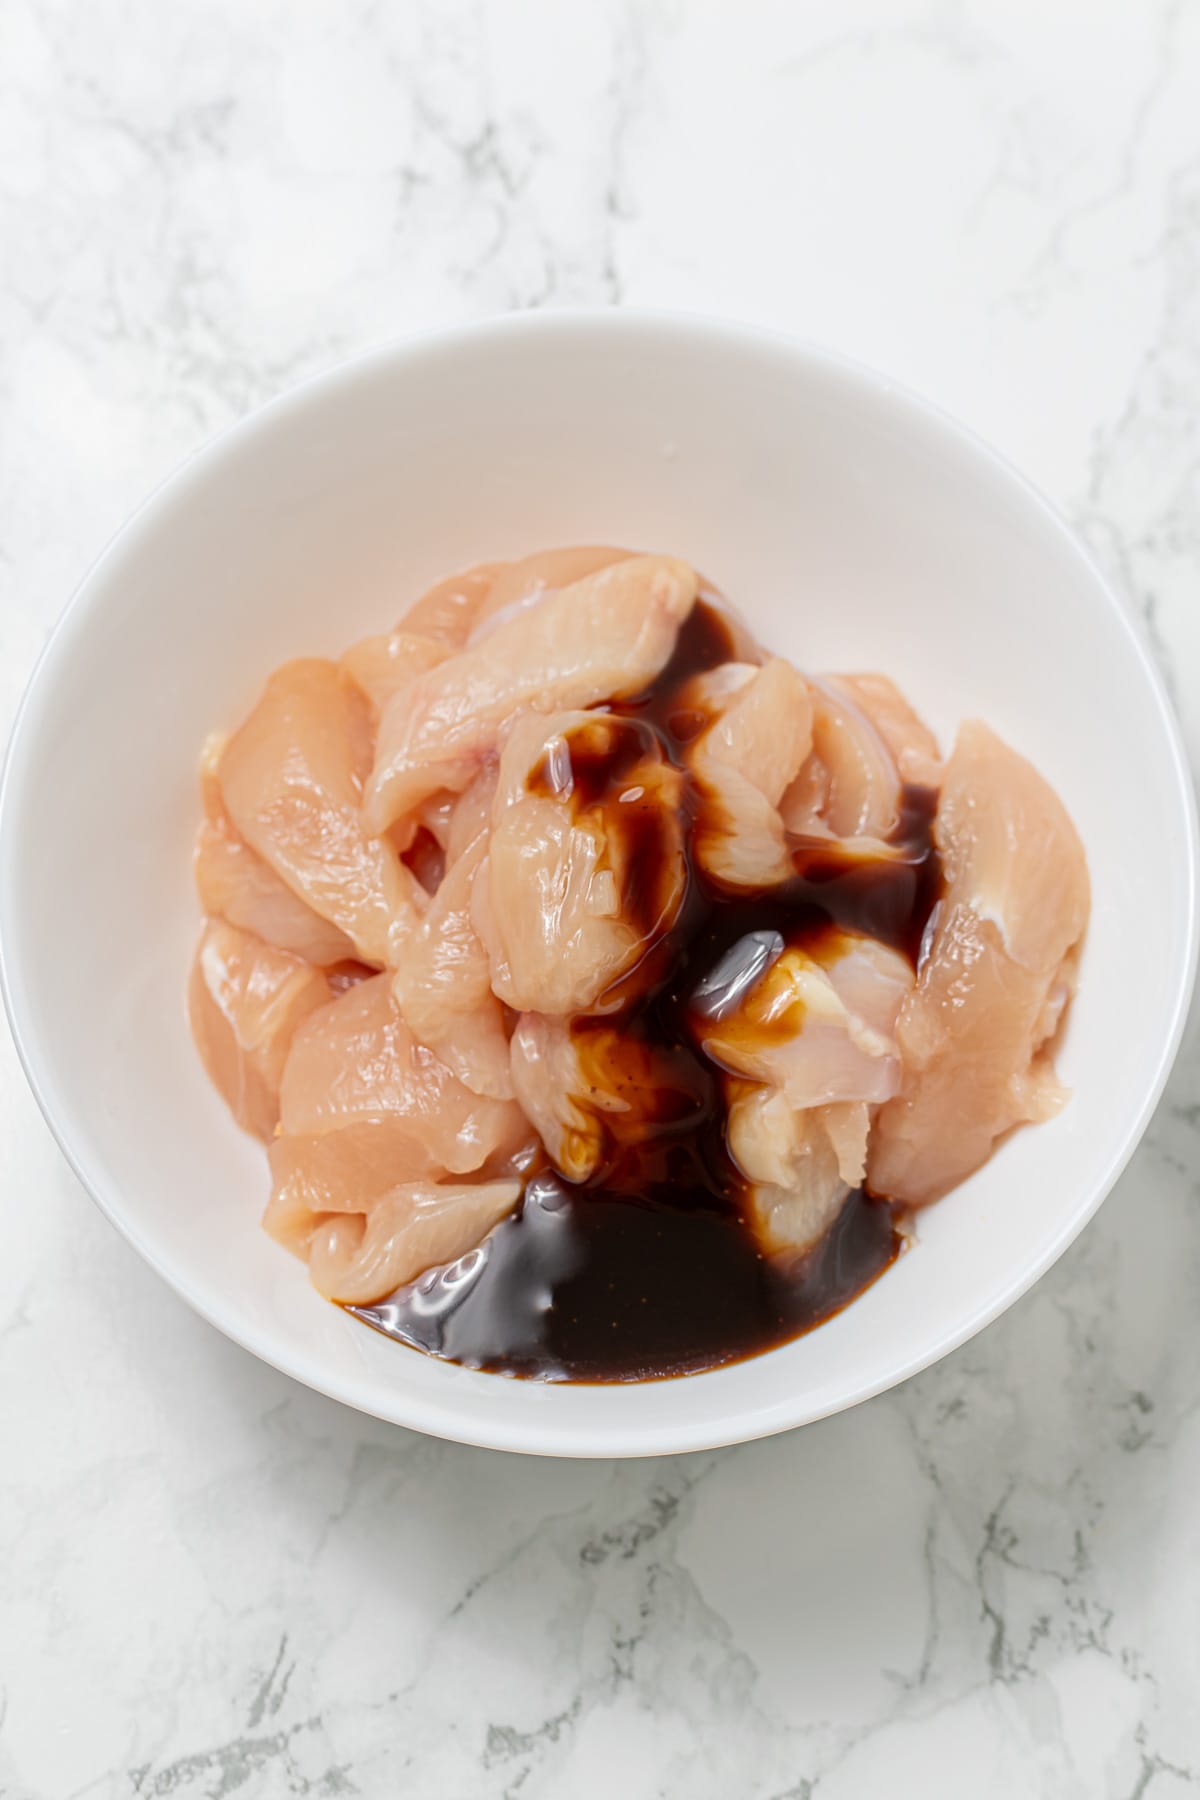 Raw chicken slices in a white bowl with teriyaki sauce poured on top.